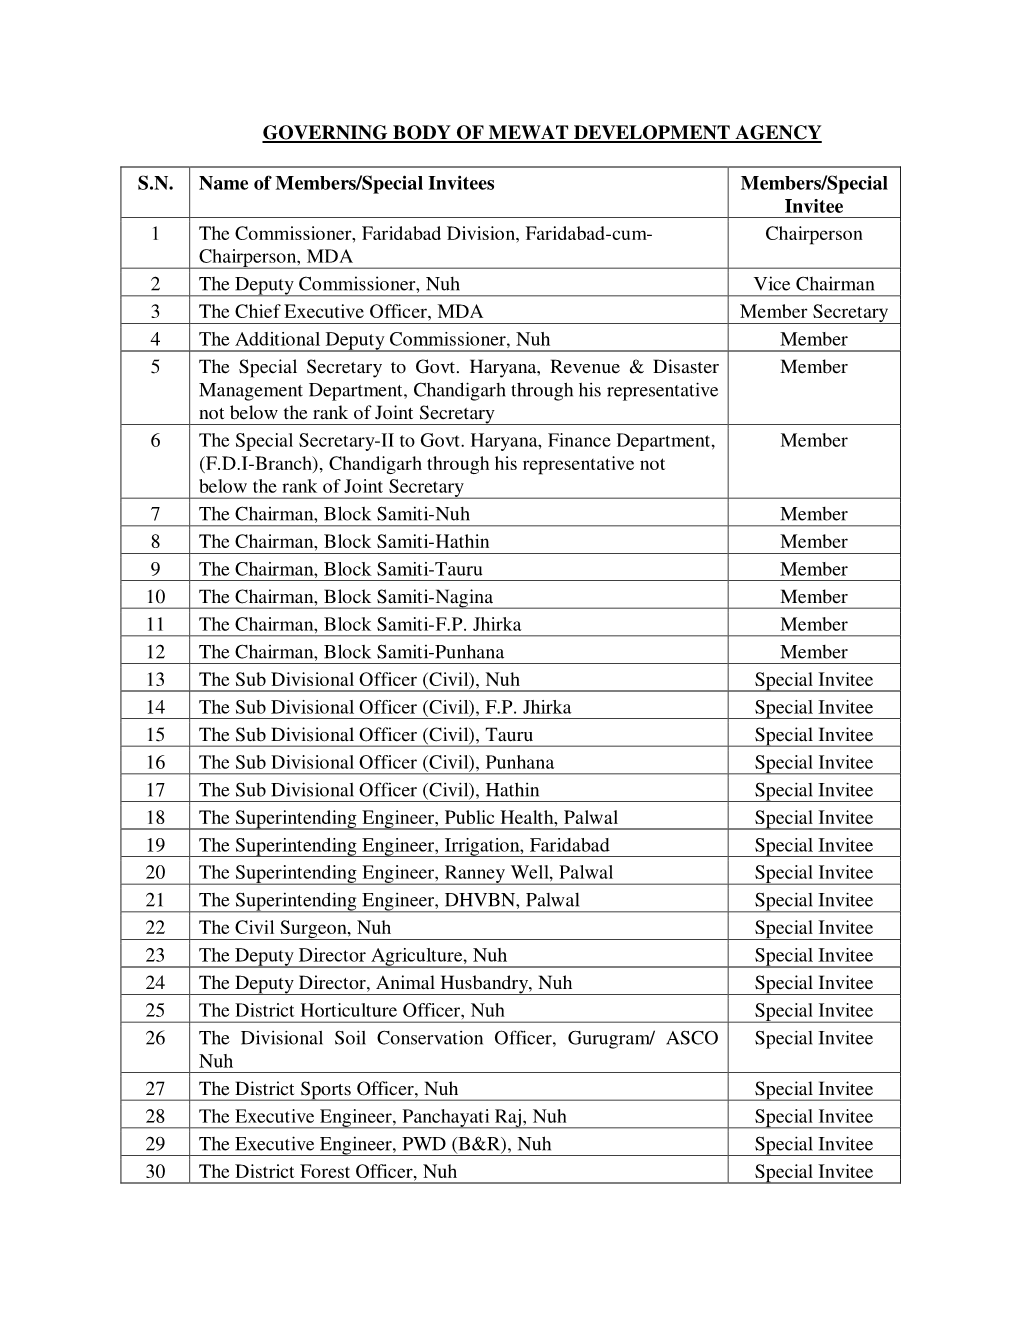 GOVERNING BODY of MEWAT DEVELOPMENT AGENCY S.N. Name of Members/Special Invitees Members/Special Invitee 1 the Commissioner